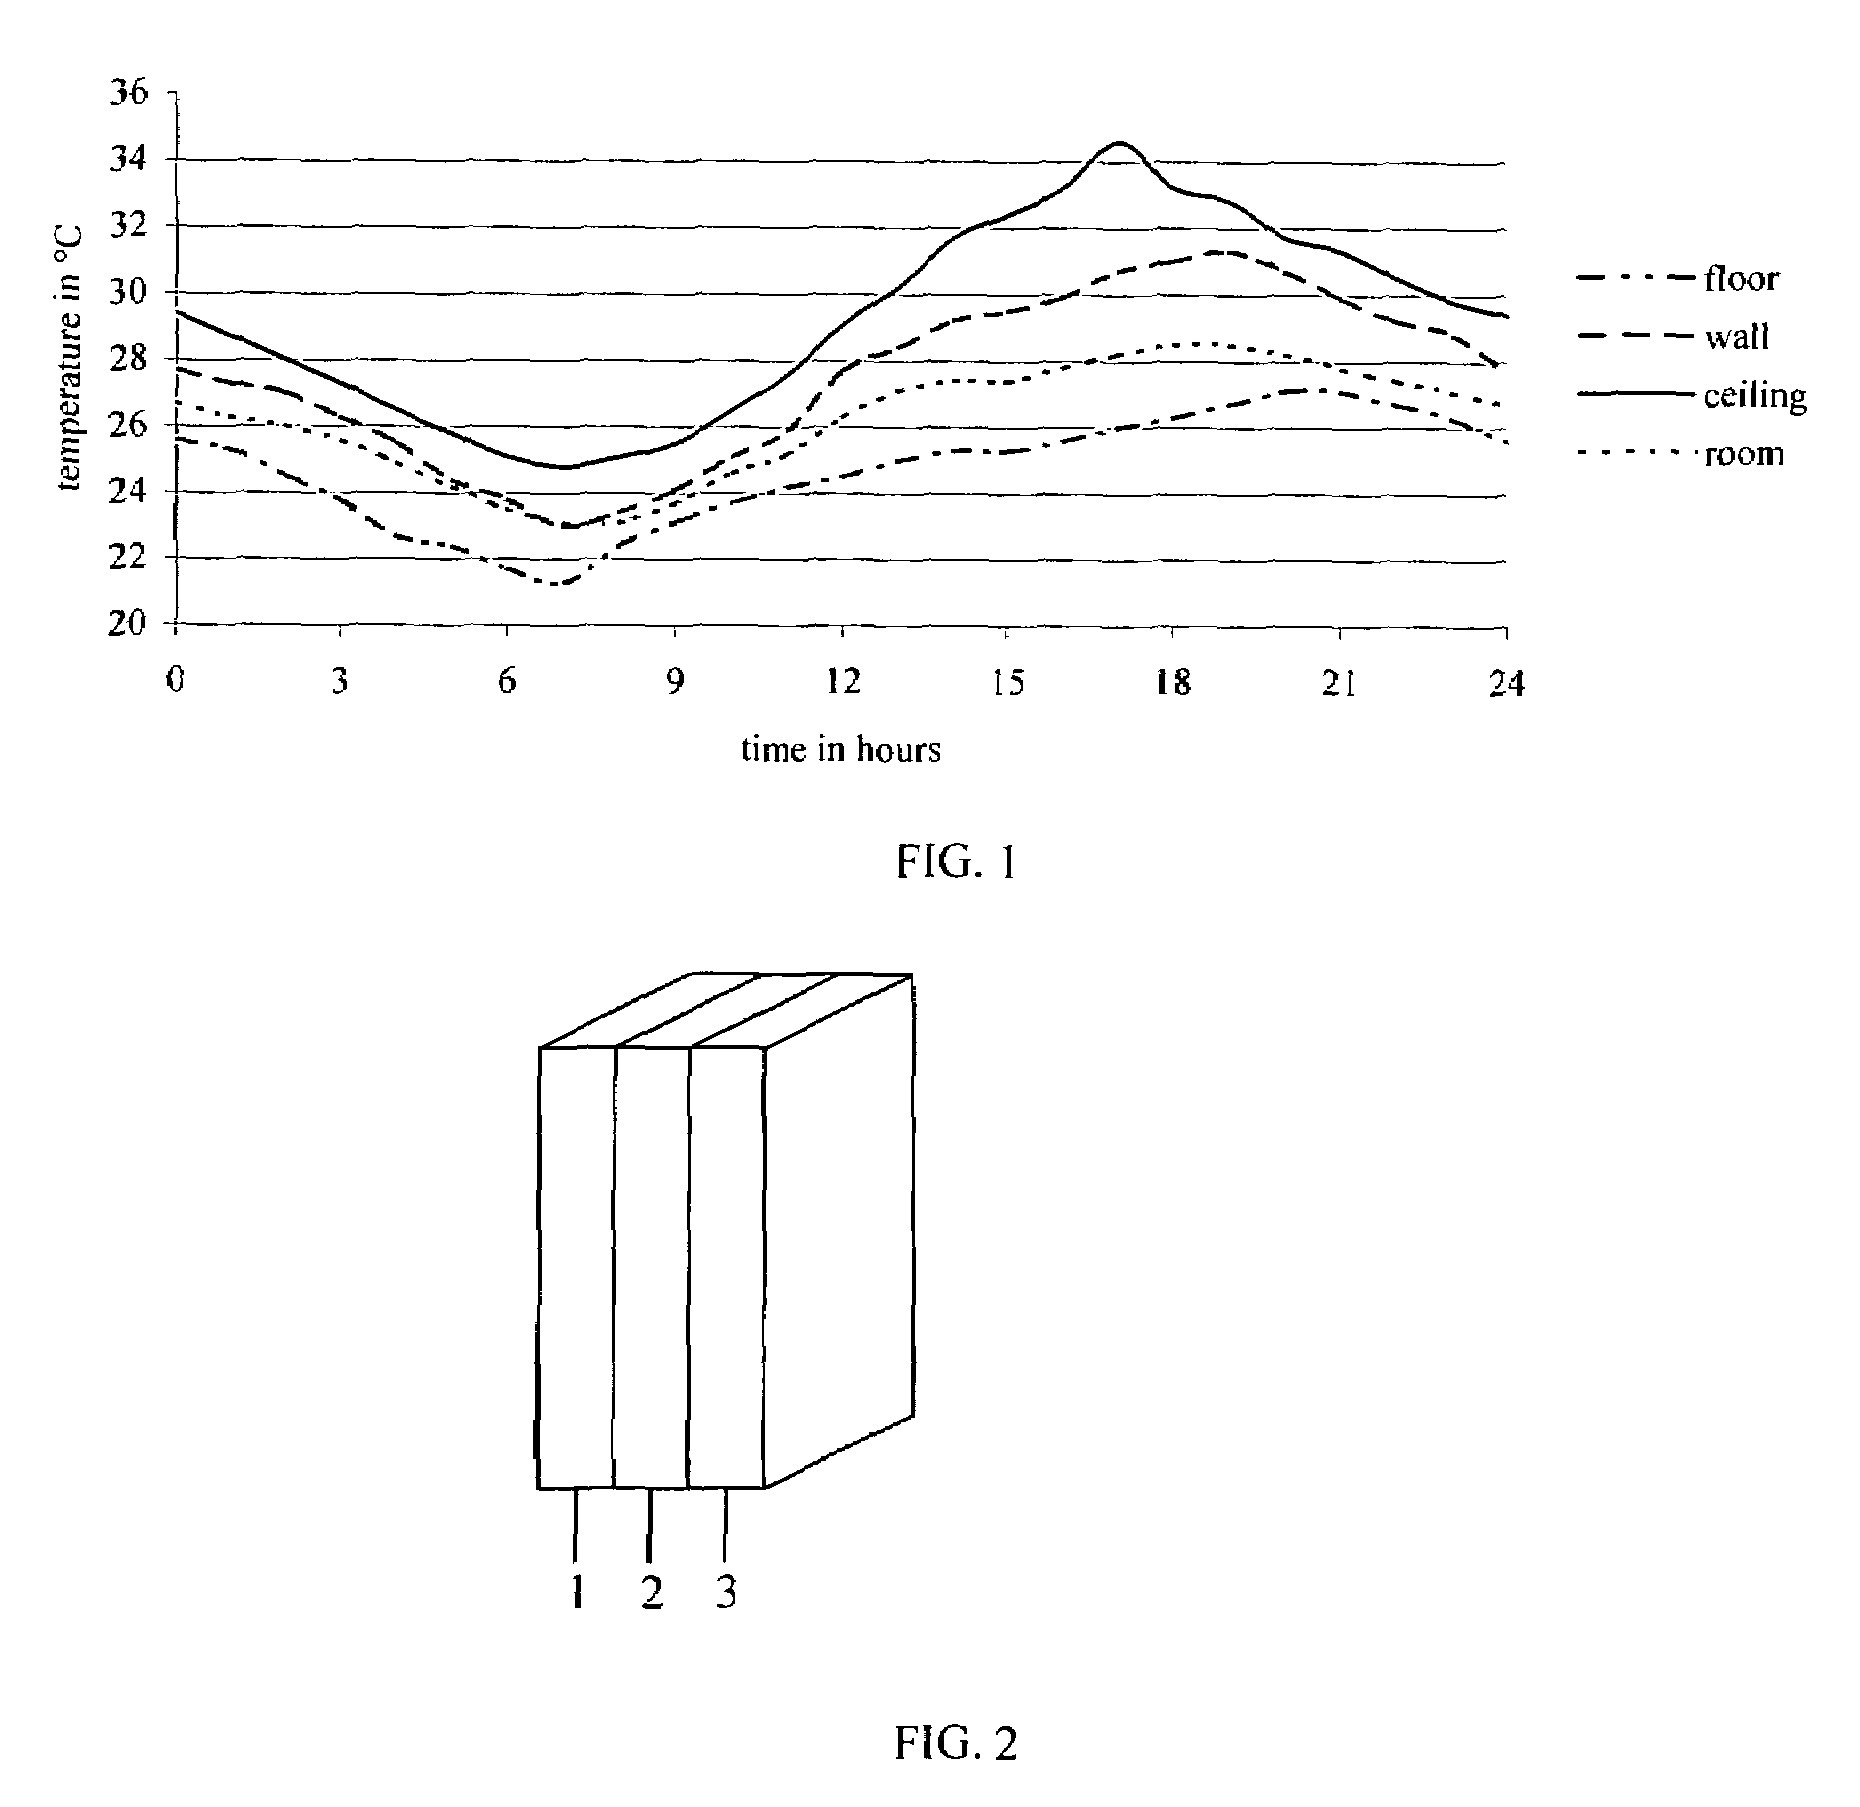 Wall covering assembly with thermo-regulating properties